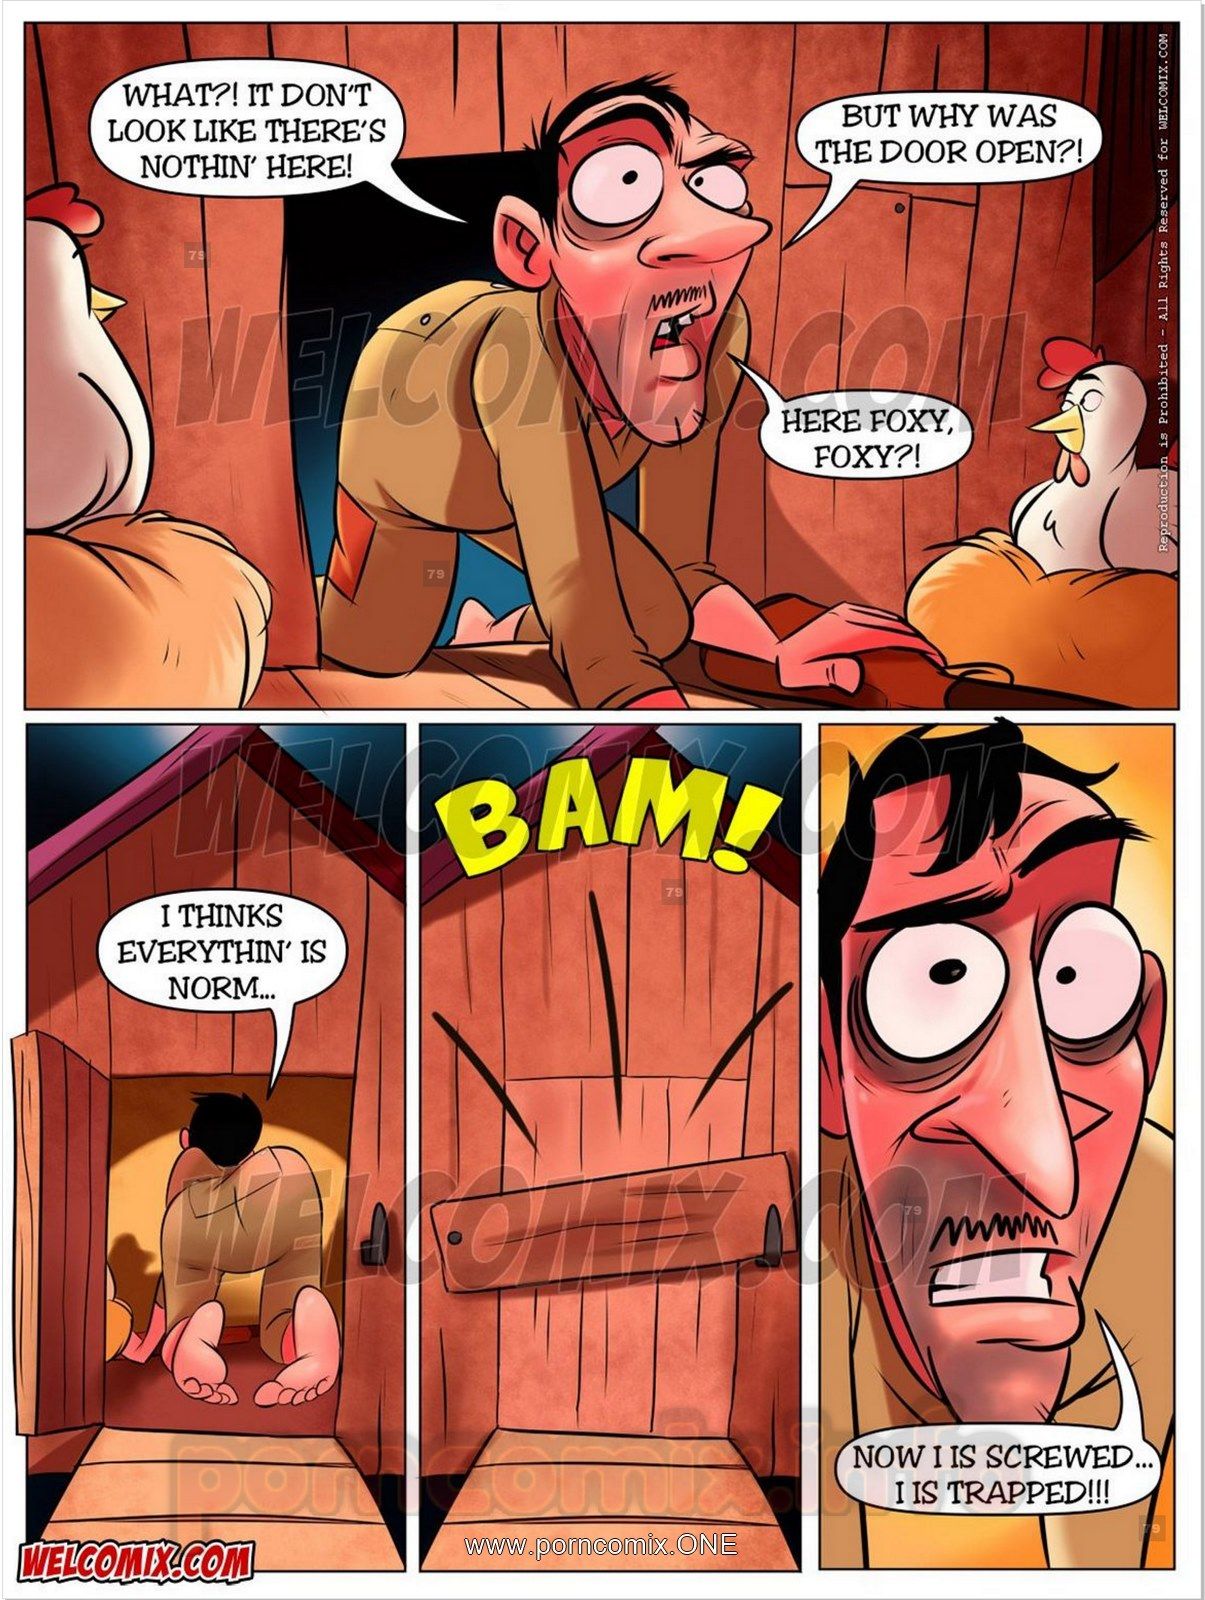 Welcomix-Hillbilly Gang 8 - There's a Fox in House page 5